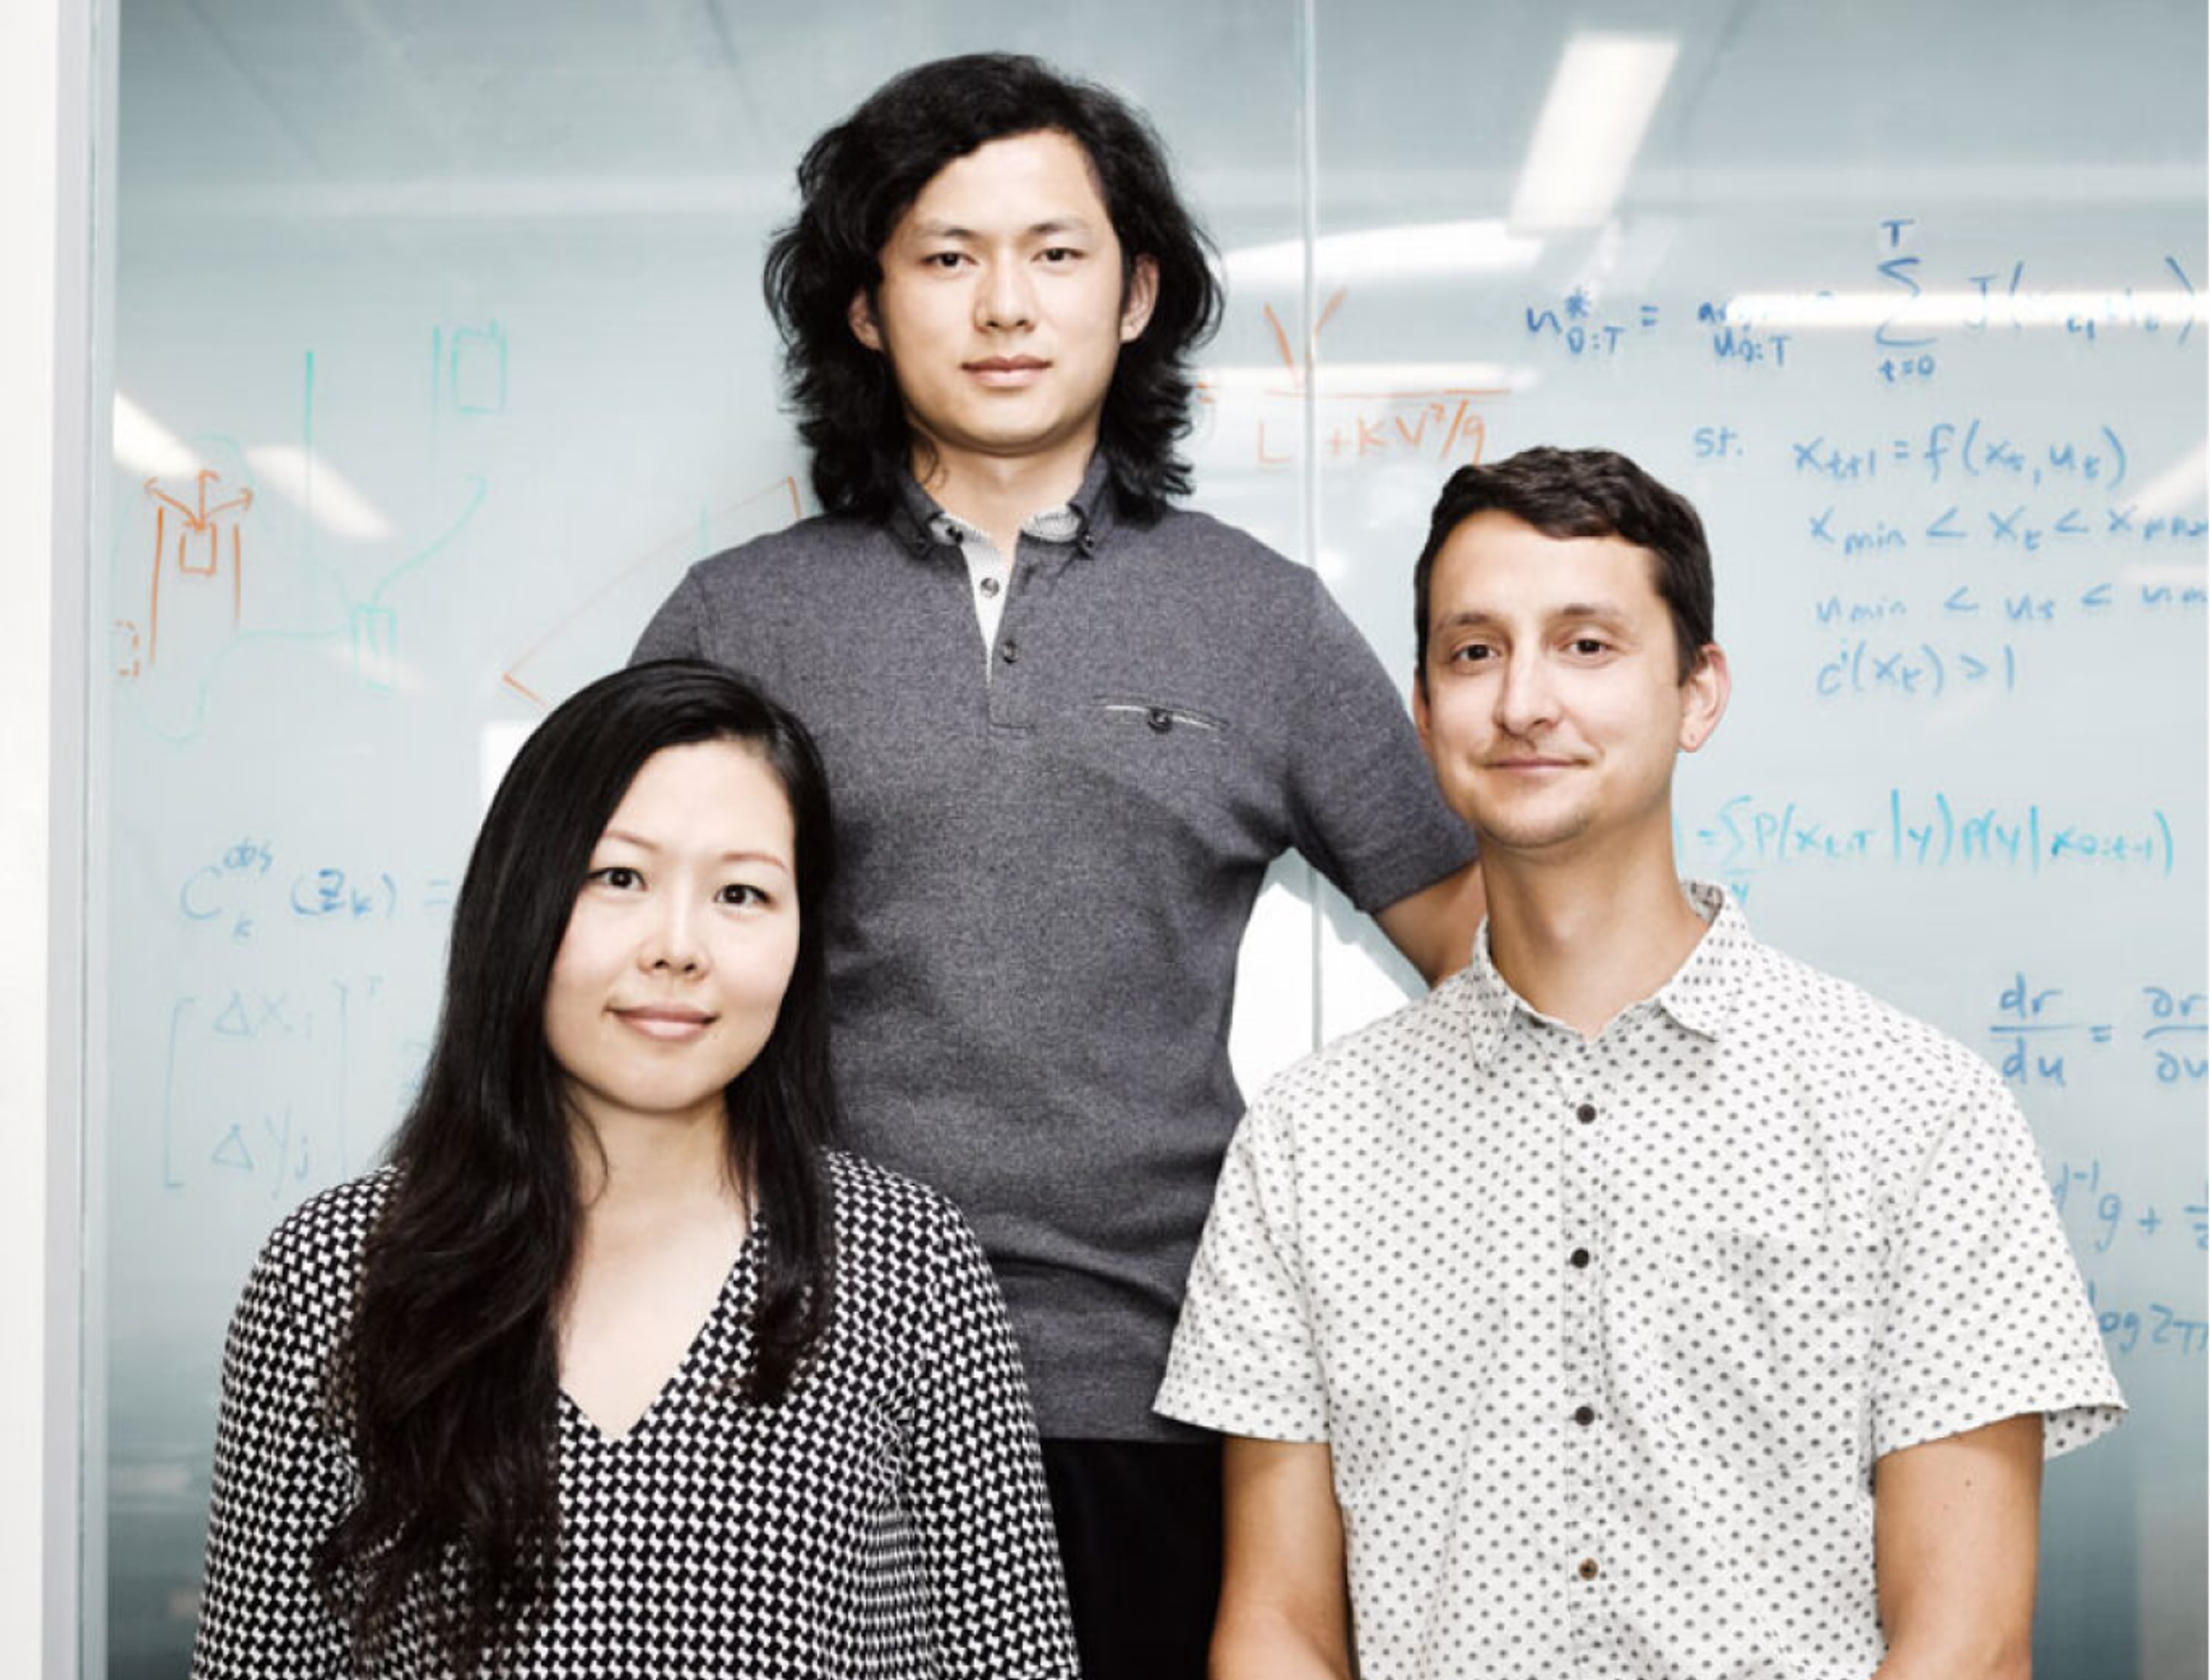 ISEE co-founders Yibiao Zhao (top), Debbie Yu (left), and Chris Baker.